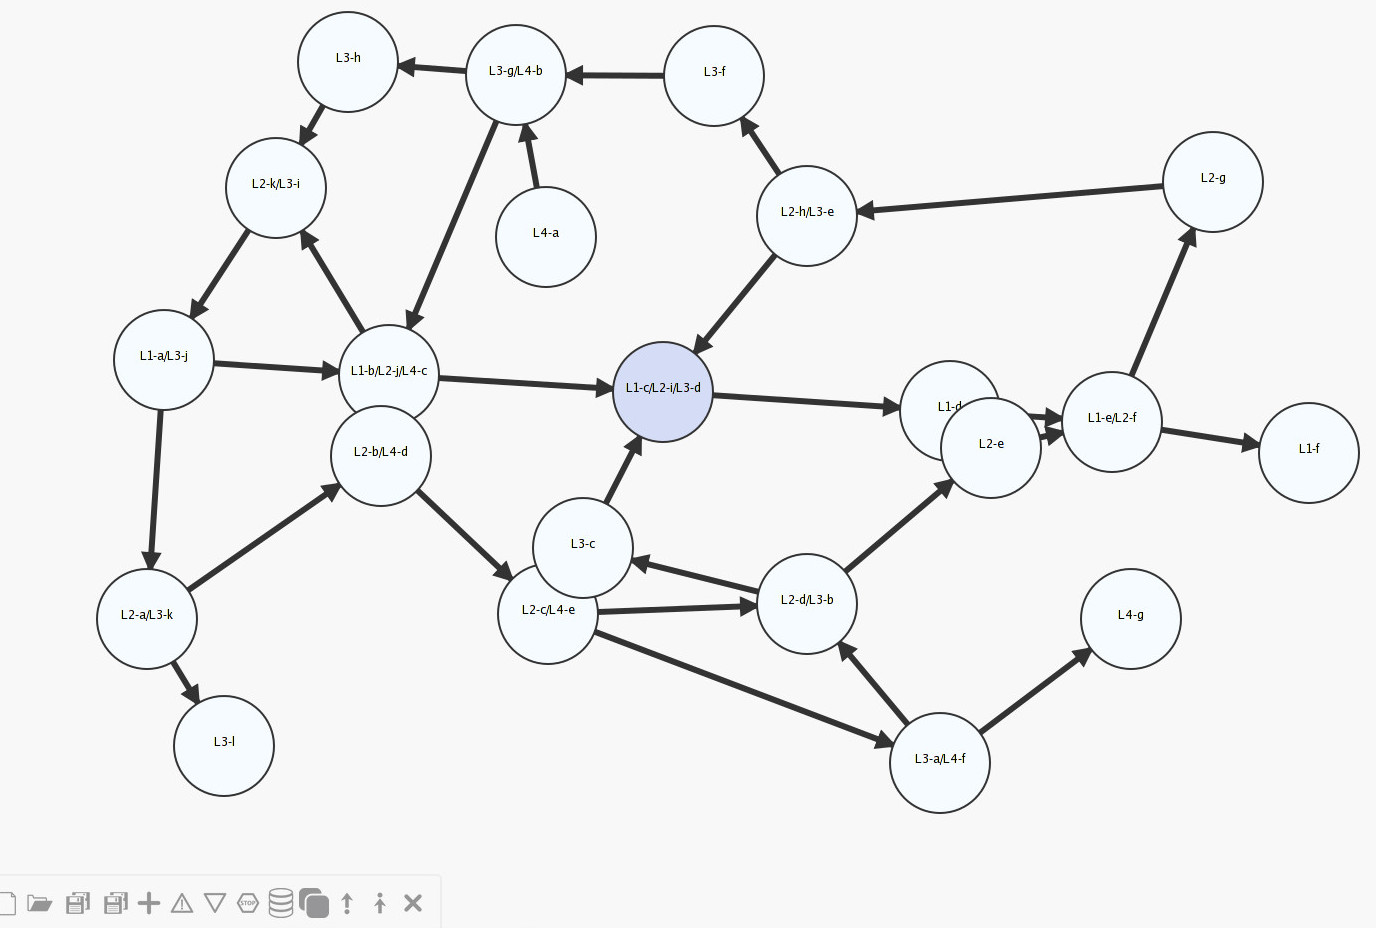 json-dgc webui with loaded example graph